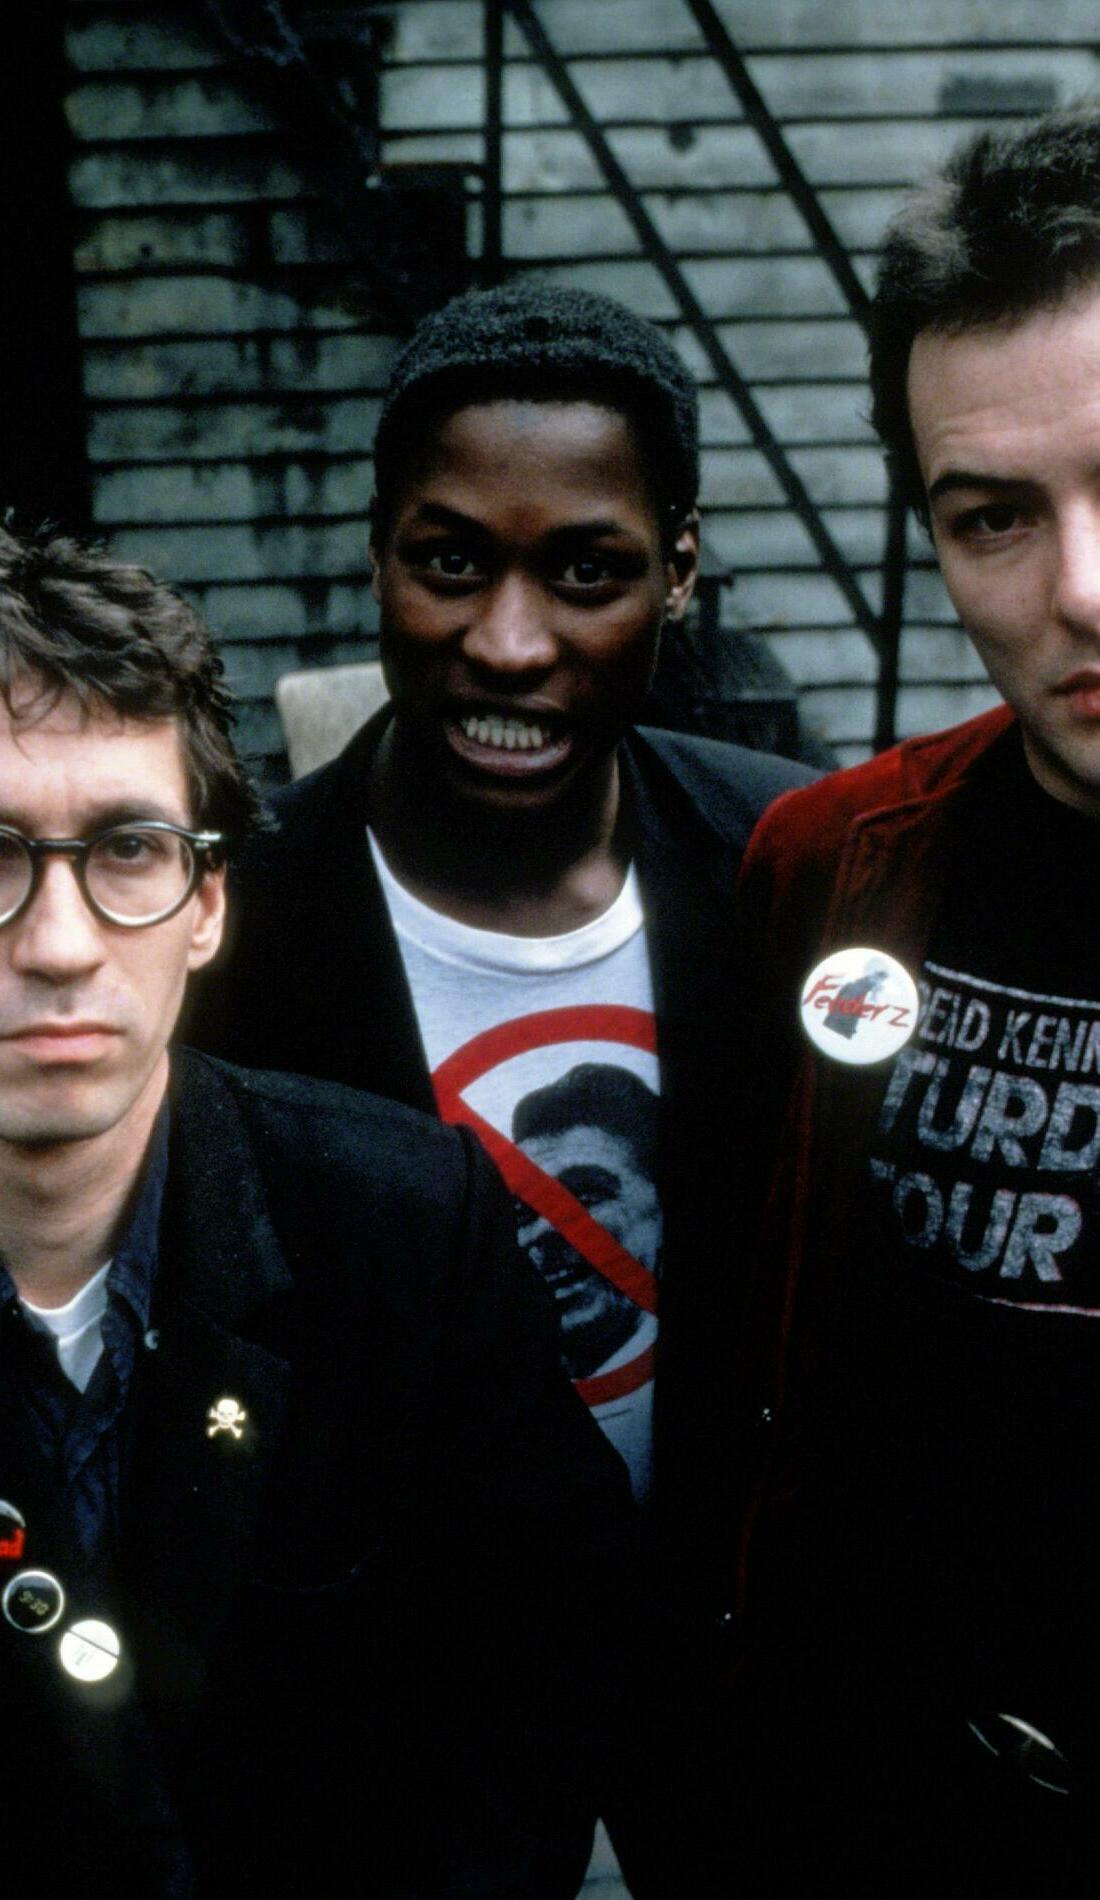 A Dead Kennedys live event